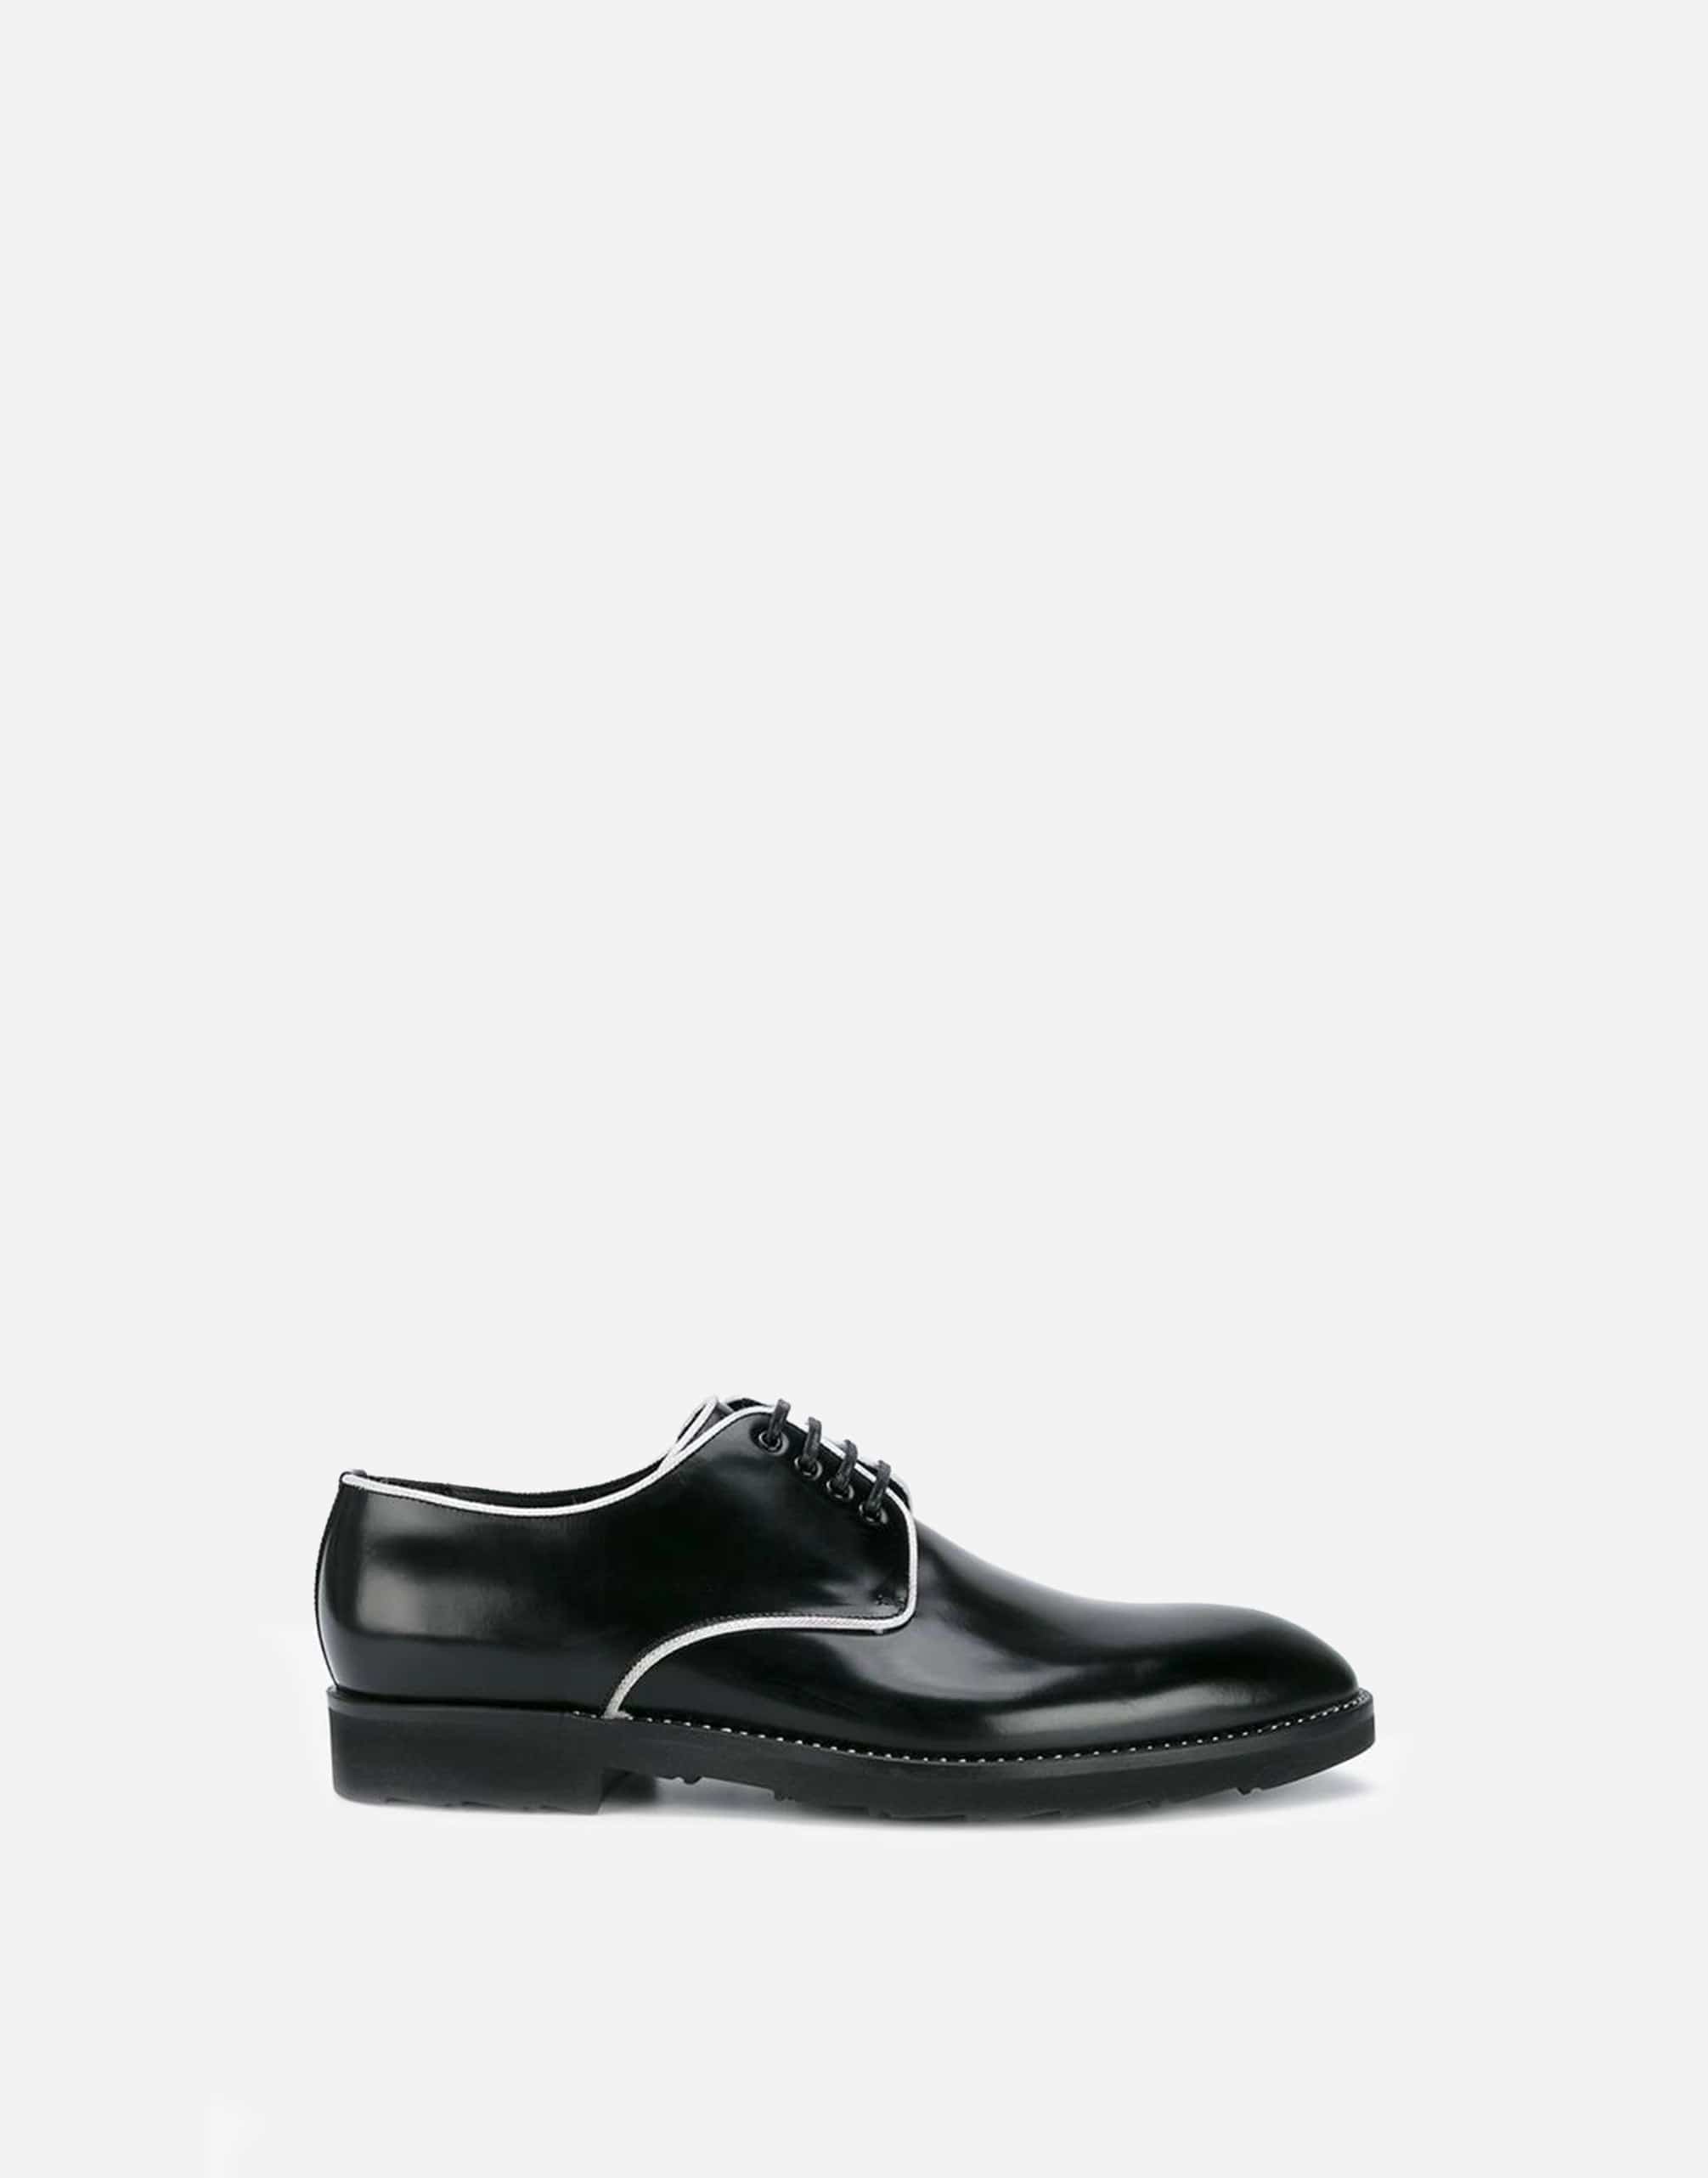 Dolce & Gabbana Contrast-Trimmed Polished-Leather Derby Shoes